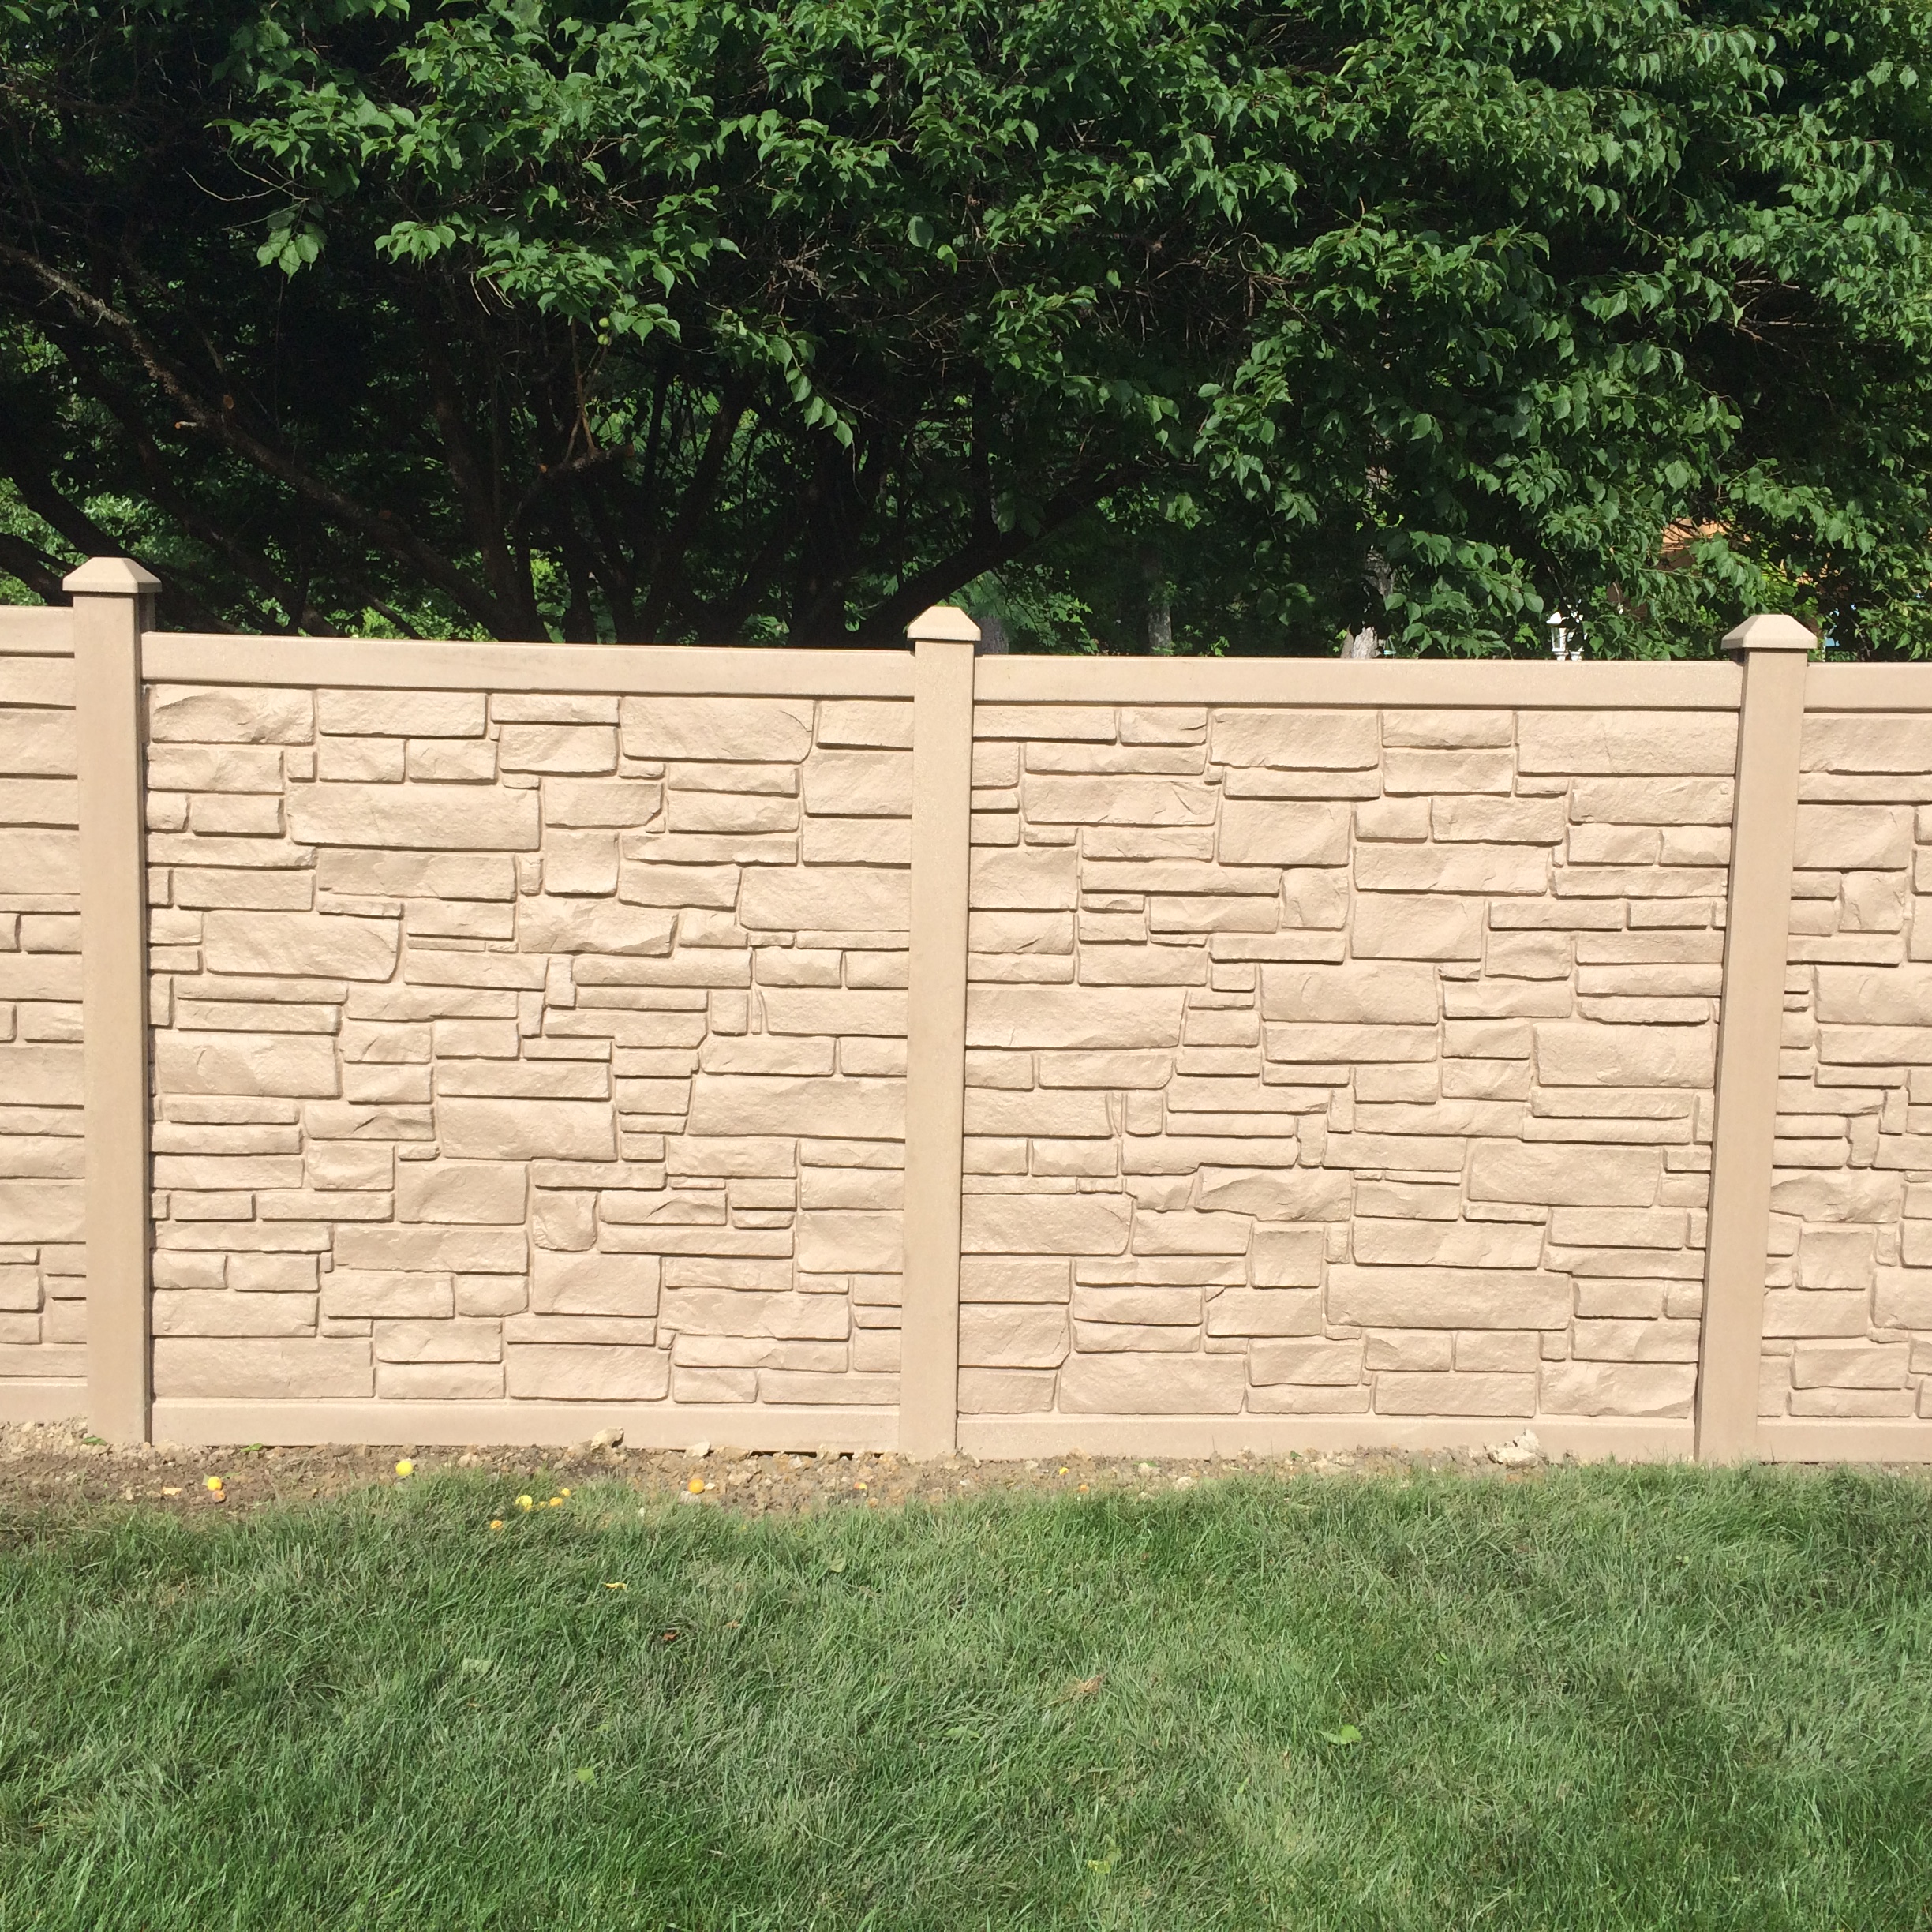 Ecostone Simulated Wood Fence Installaion in Norfolk VA adds a brick feel to a vinyl fence.